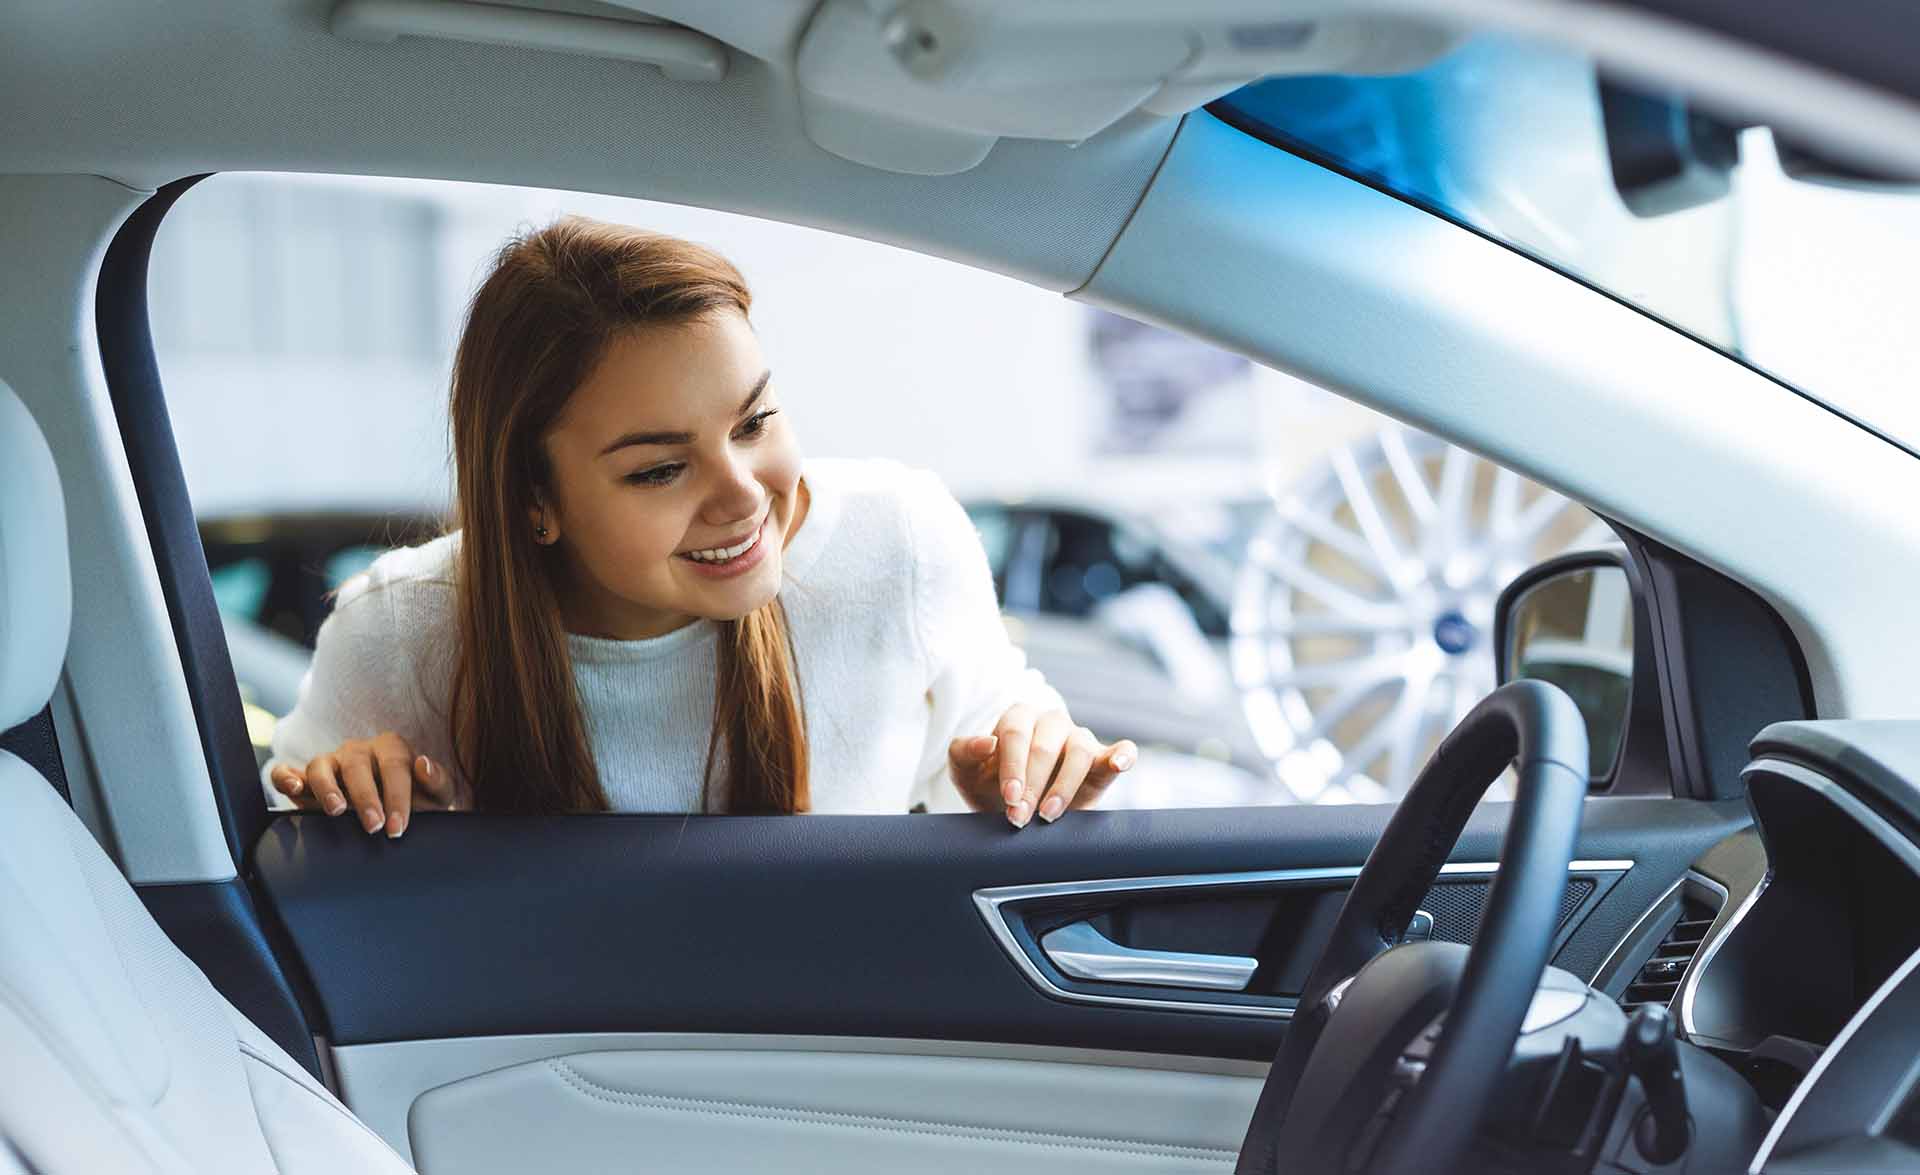 Young woman smiling as she looks into the interior of a vehicle while shopping at a car dealership